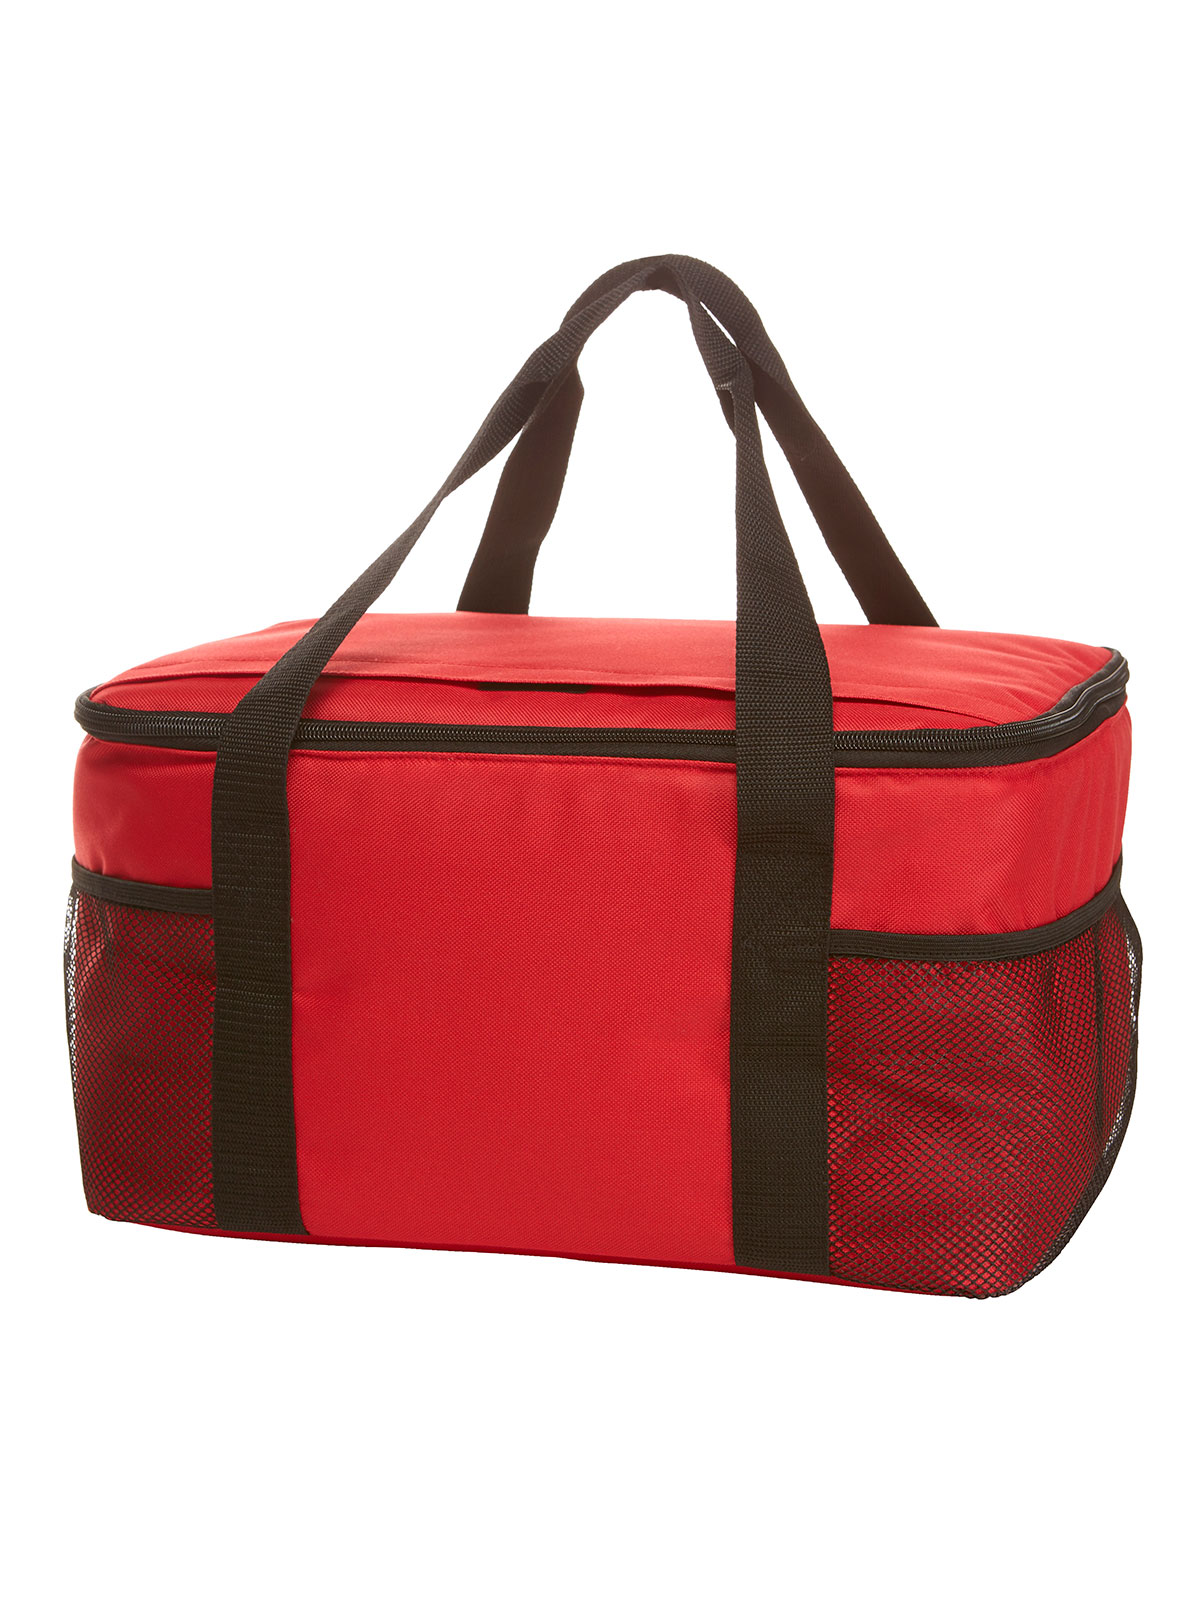 cool-bag-family-xl-red.webp